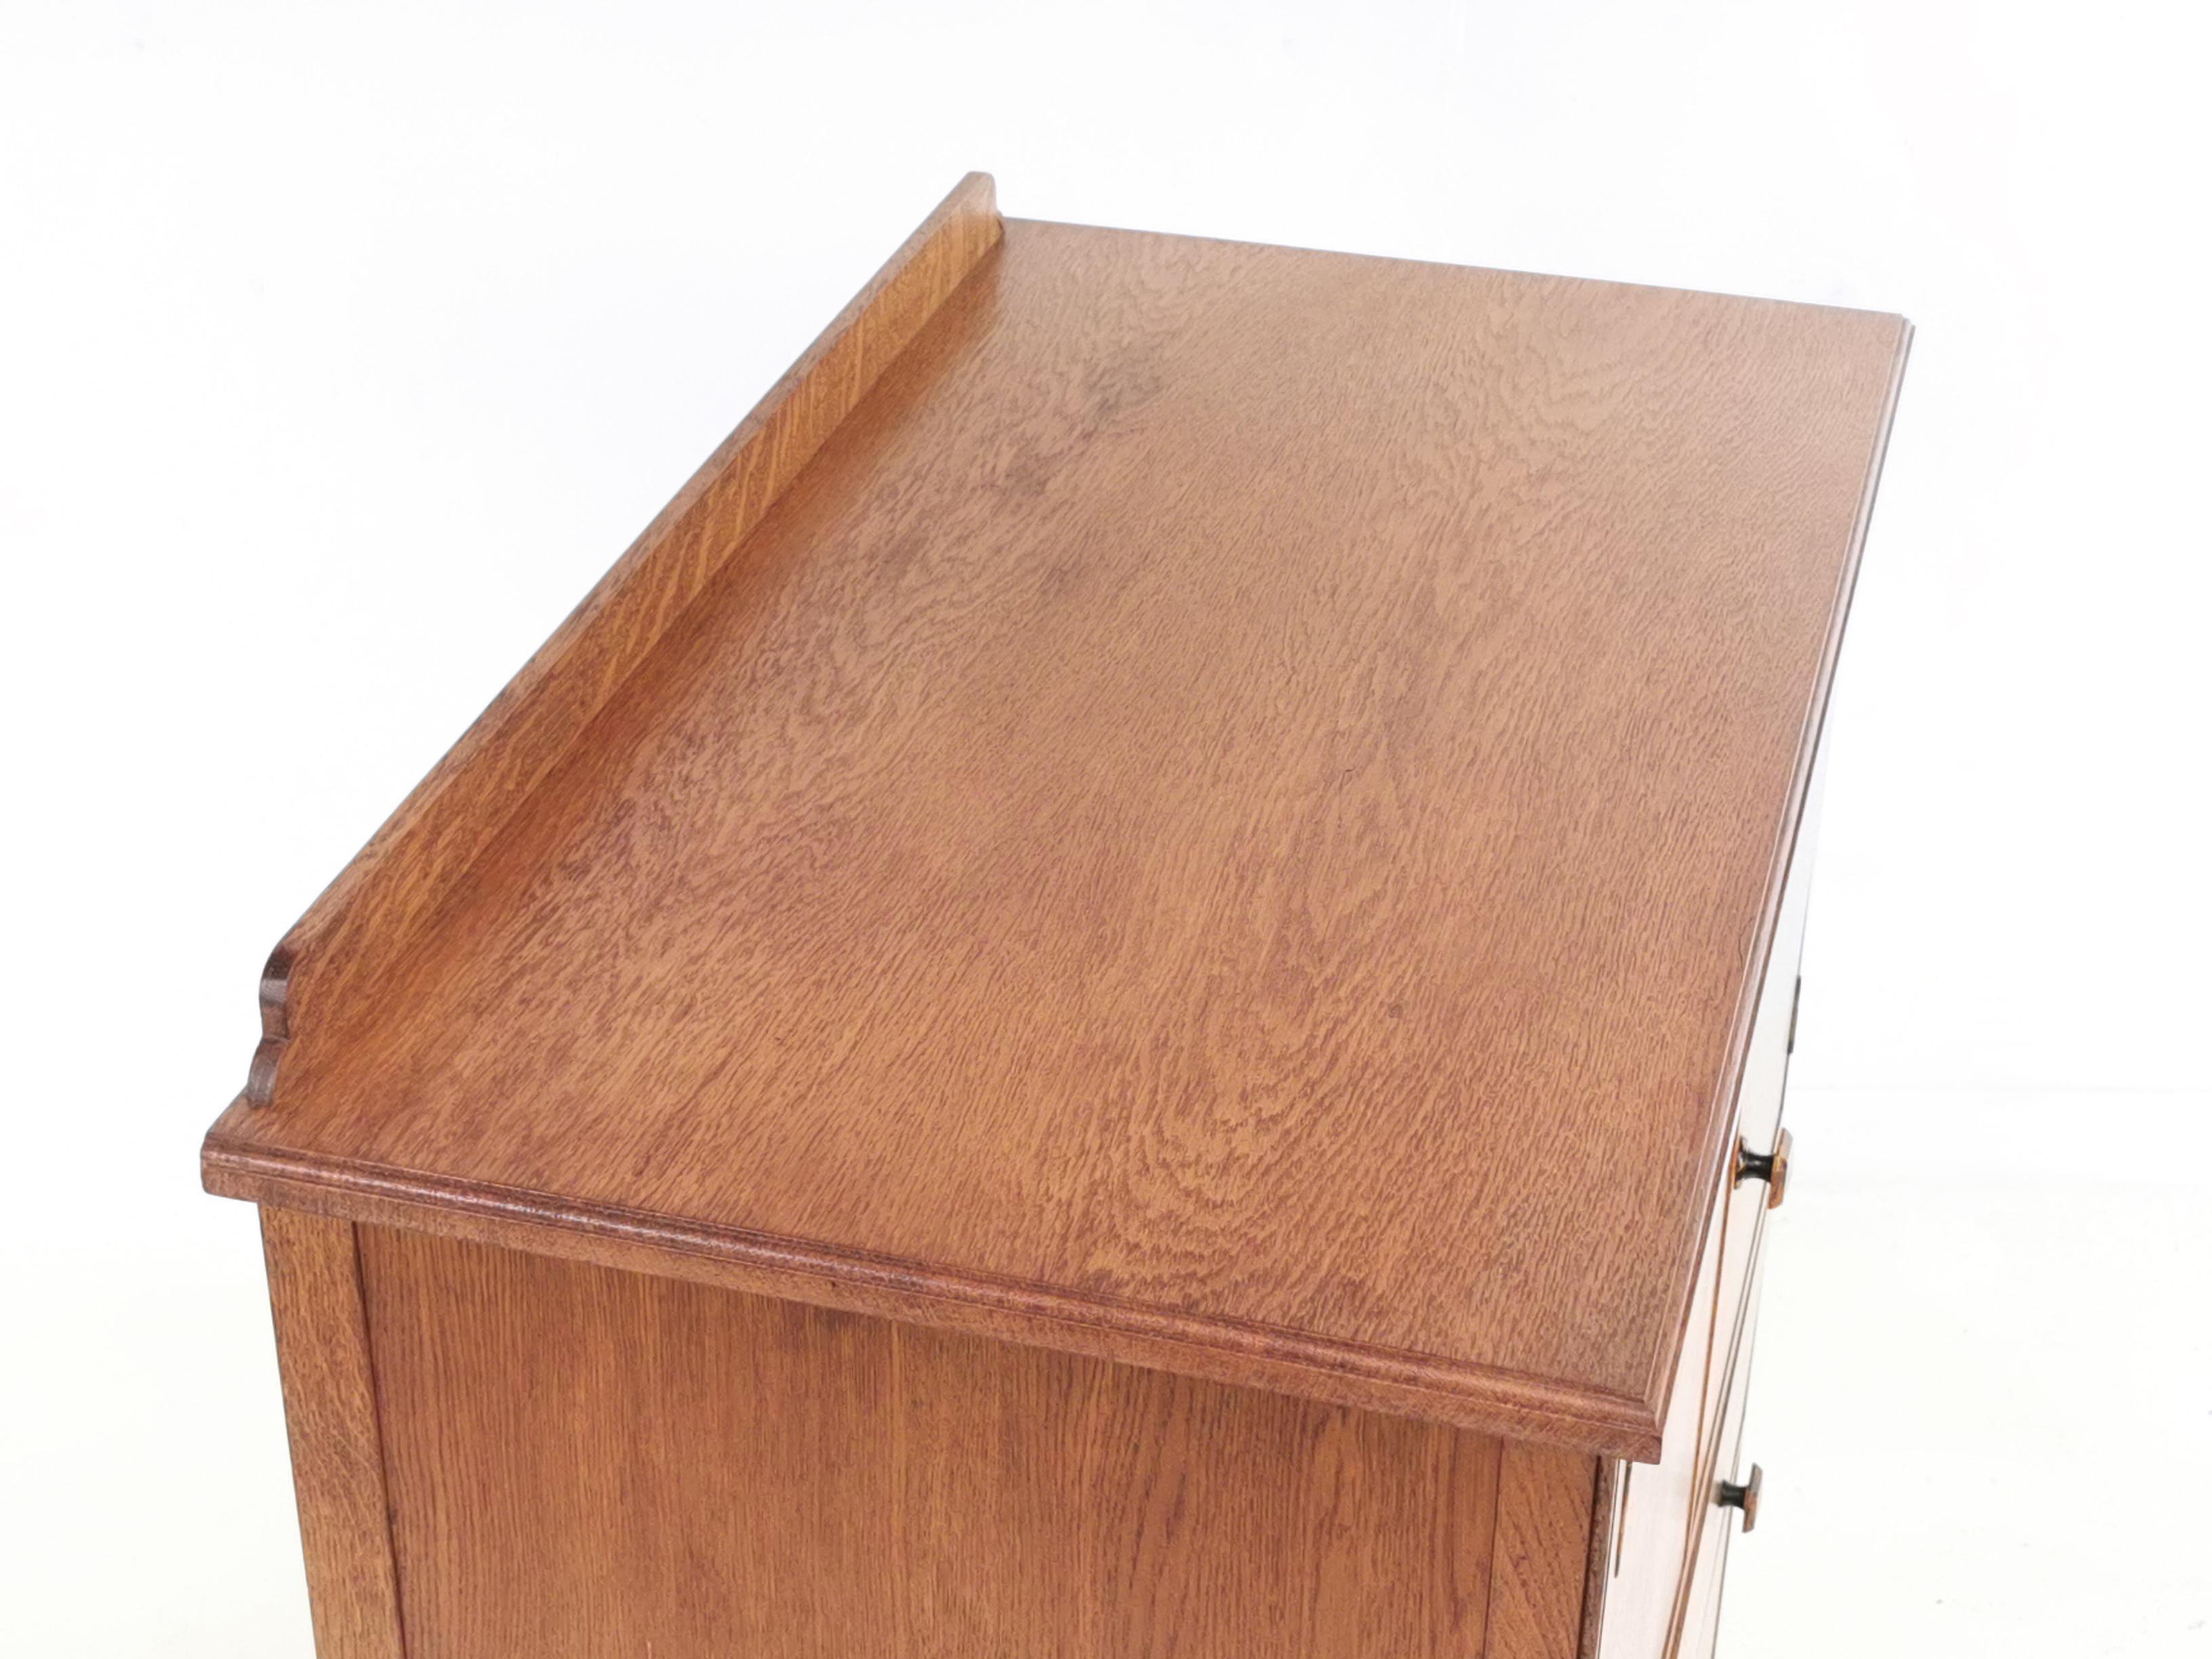 Maple & Co Tall boy

British made Maple & Co, tallboy compactum chest of drawers on out-turned legs. Featuring square bevelled stone pull handles and art deco motif on top of the cupboard doors.

From the first quarter of the 20th century, this